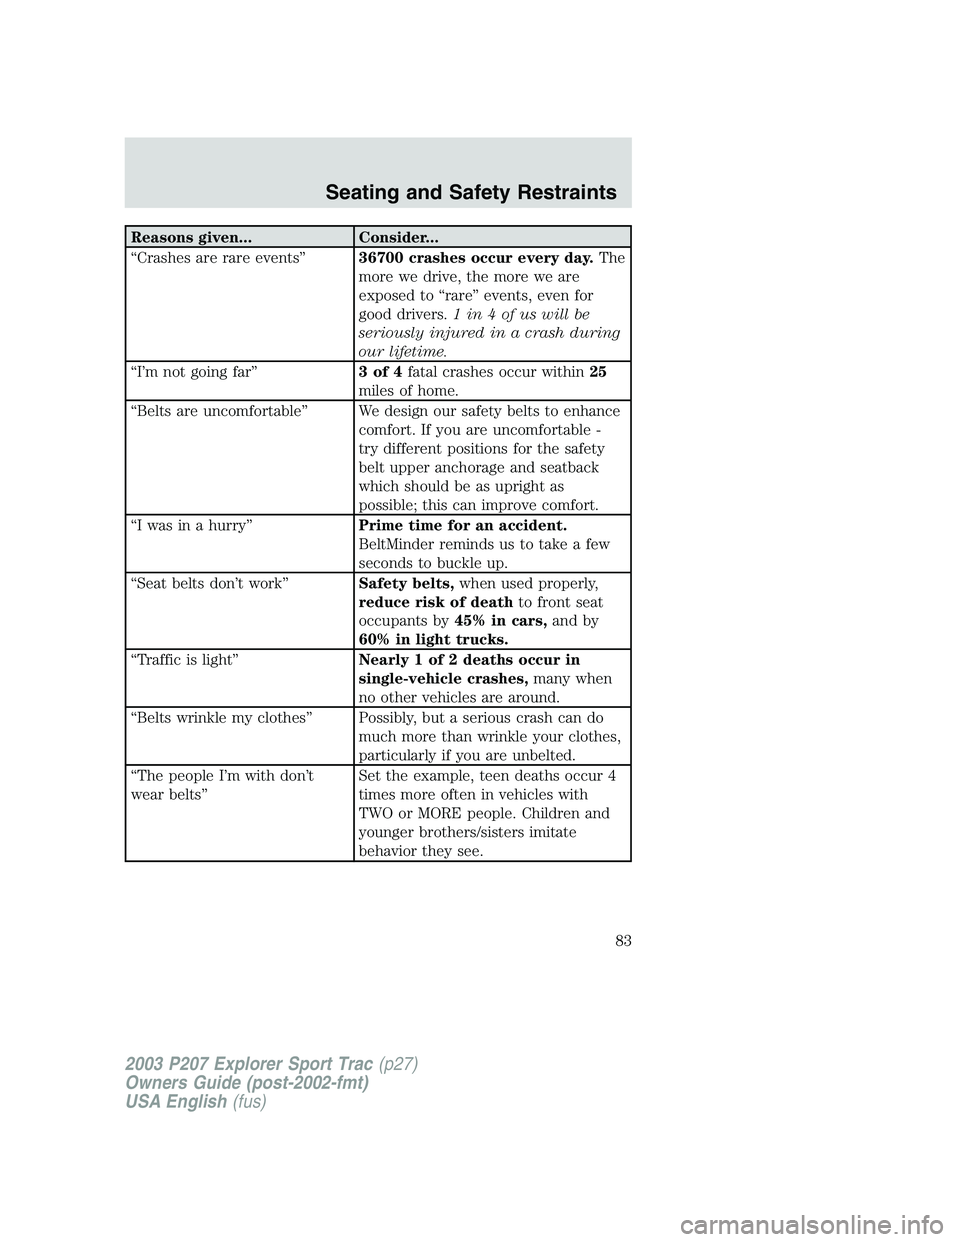 FORD EXPLORER SPORT TRAC 2003  Owners Manual Reasons given... Consider...
“Crashes are rare events”36700 crashes occur every day.The
more we drive, the more we are
exposed to “rare” events, even for
good drivers.1in4ofuswillbe
seriously 